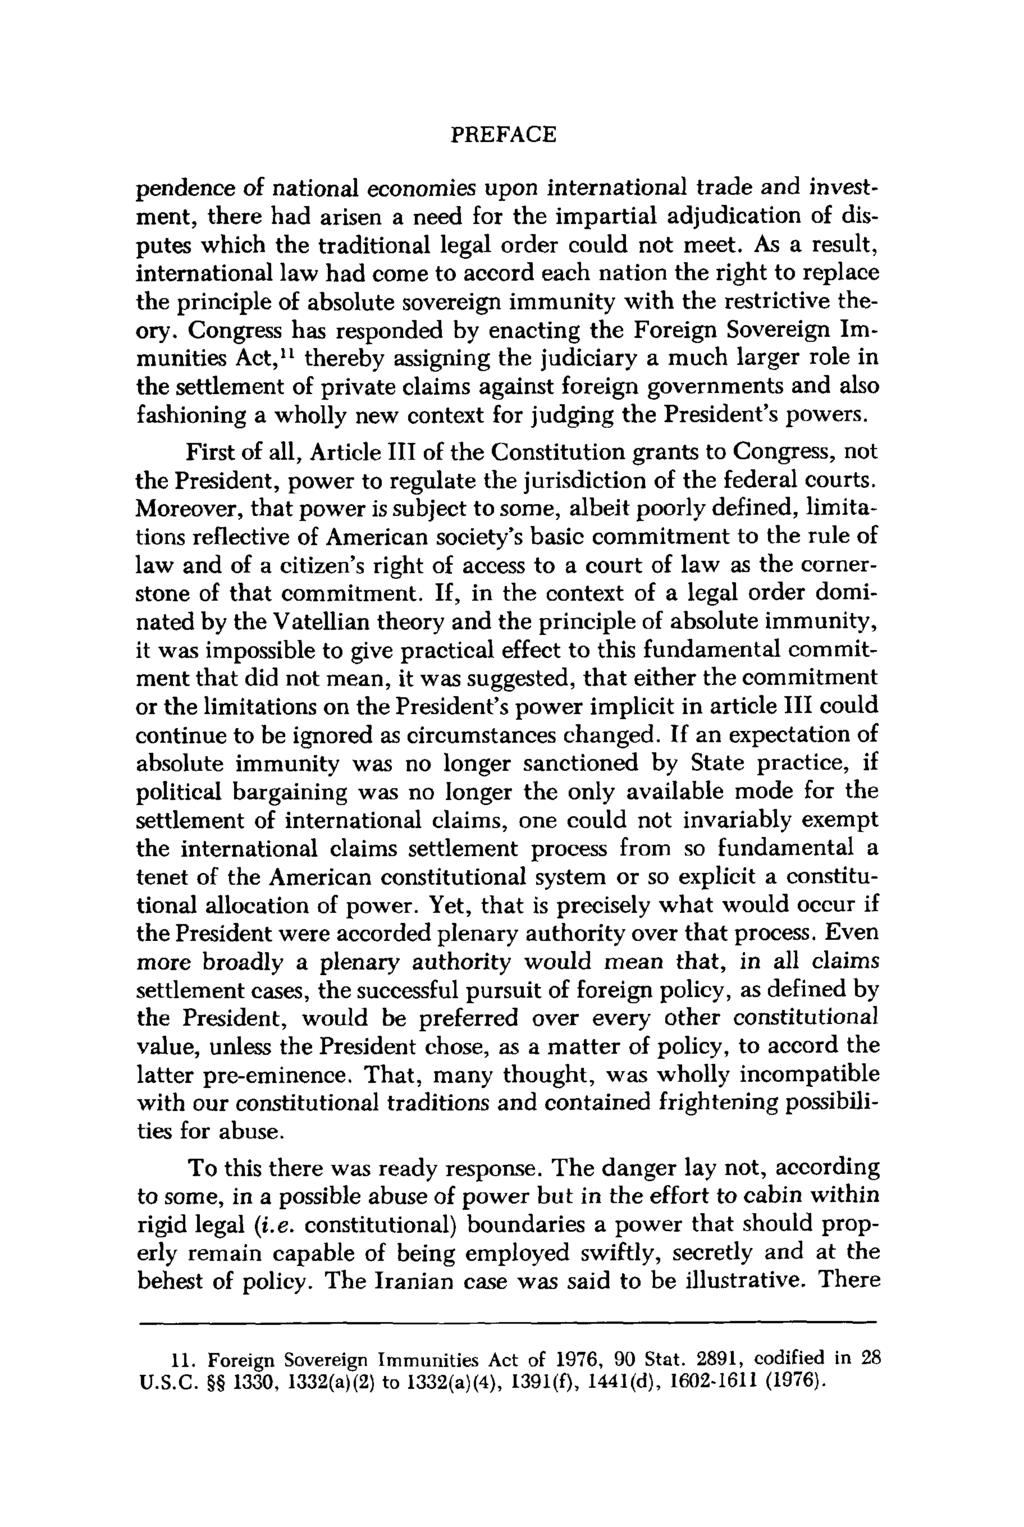 PREFACE pendence of national economies upon international trade and investment, there had arisen a need for the impartial adjudication of disputes which the traditional legal order could not meet.